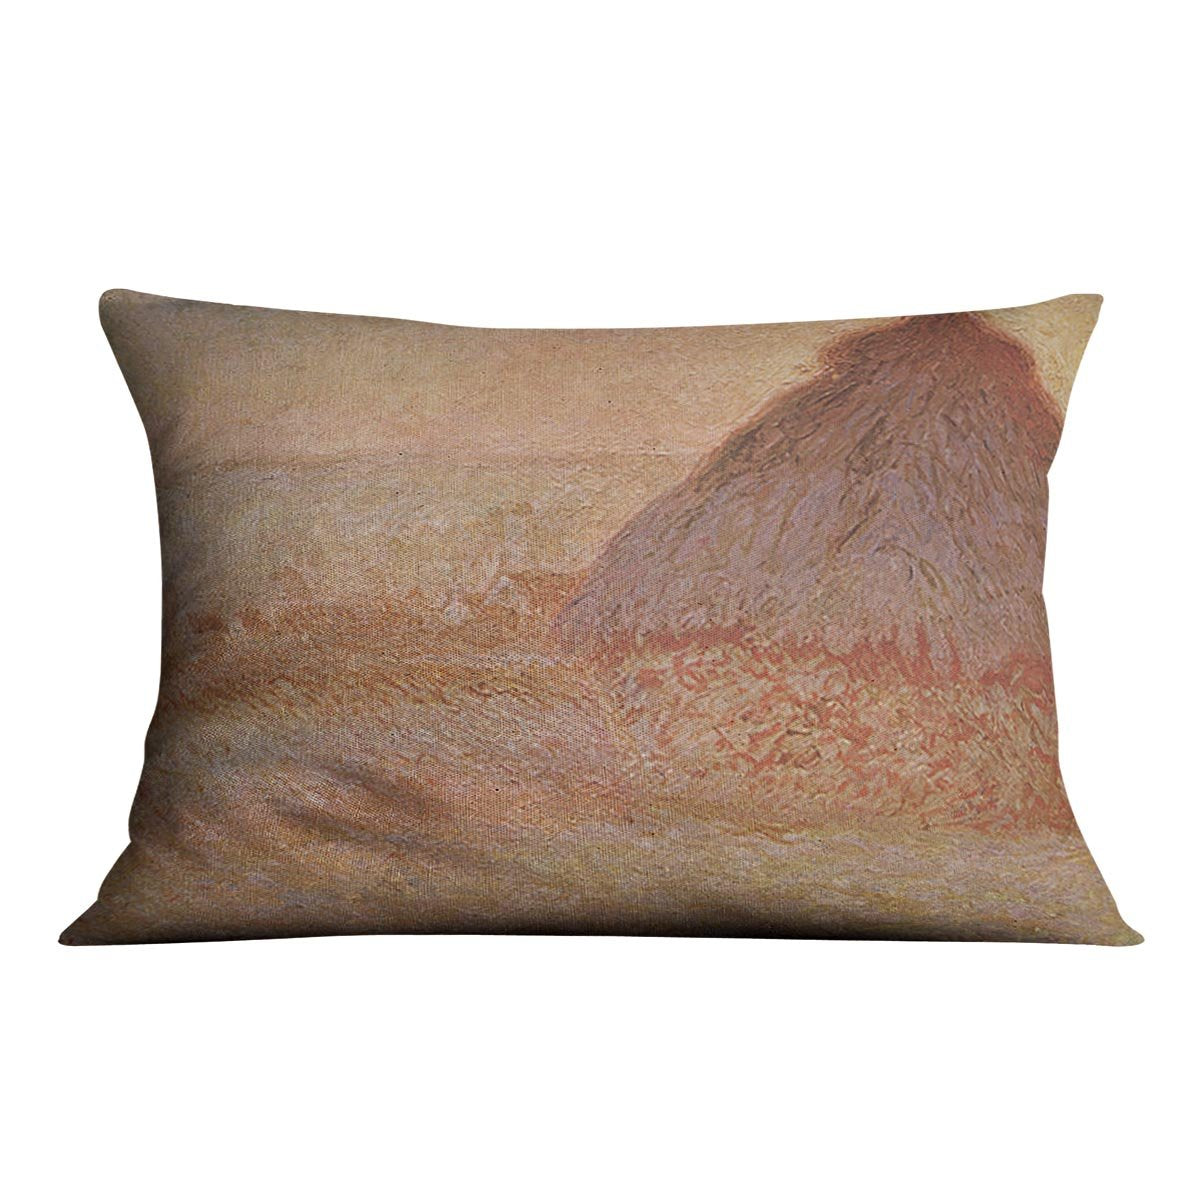 Haystacks at sunset by Monet Throw Pillow